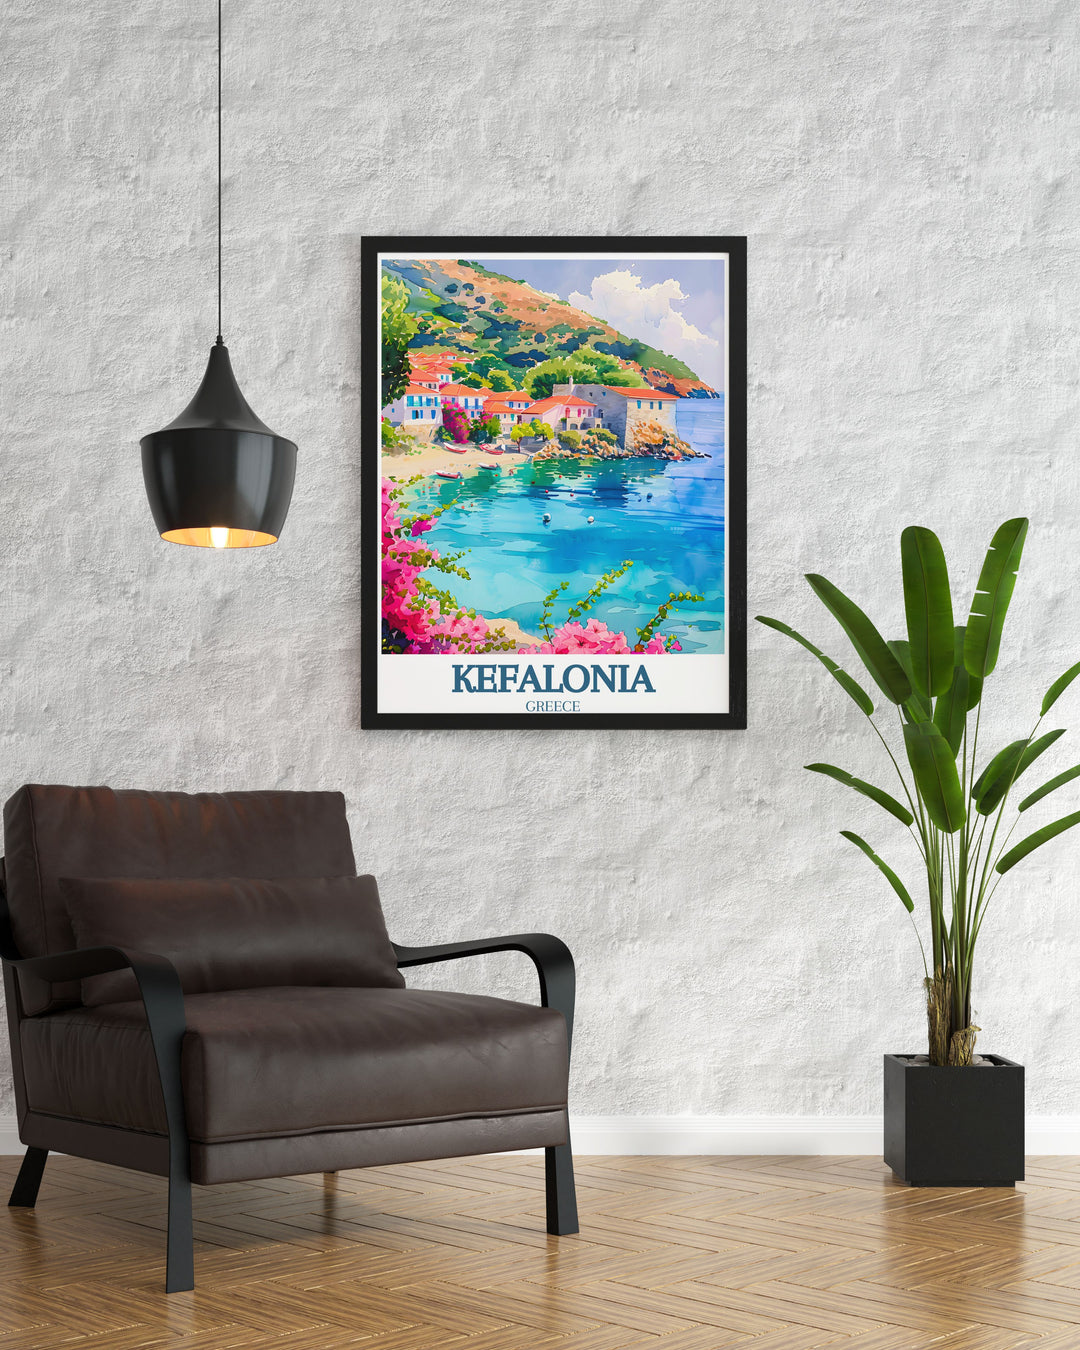 Poster showcasing Assos Village, capturing its serene beauty, historical significance, and picturesque scenery. The detailed artwork reflects the villages role as a cultural and natural gem.